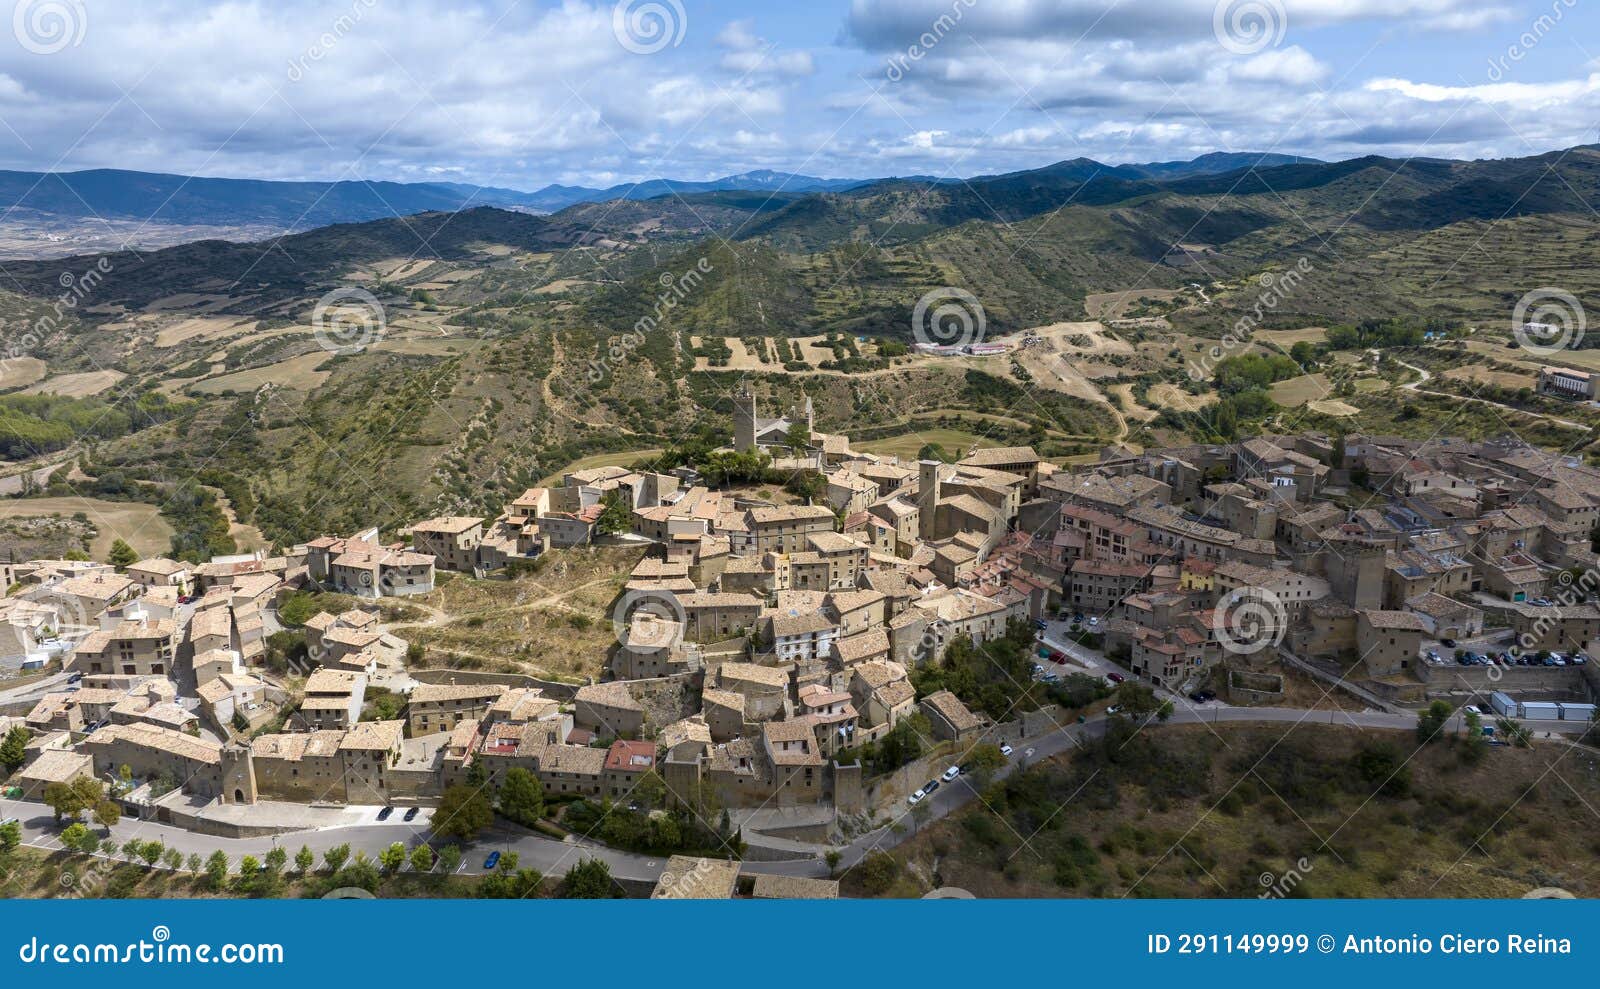 aerial view of the medieval town of sos del rey catÃ³lico in aragon, spain.